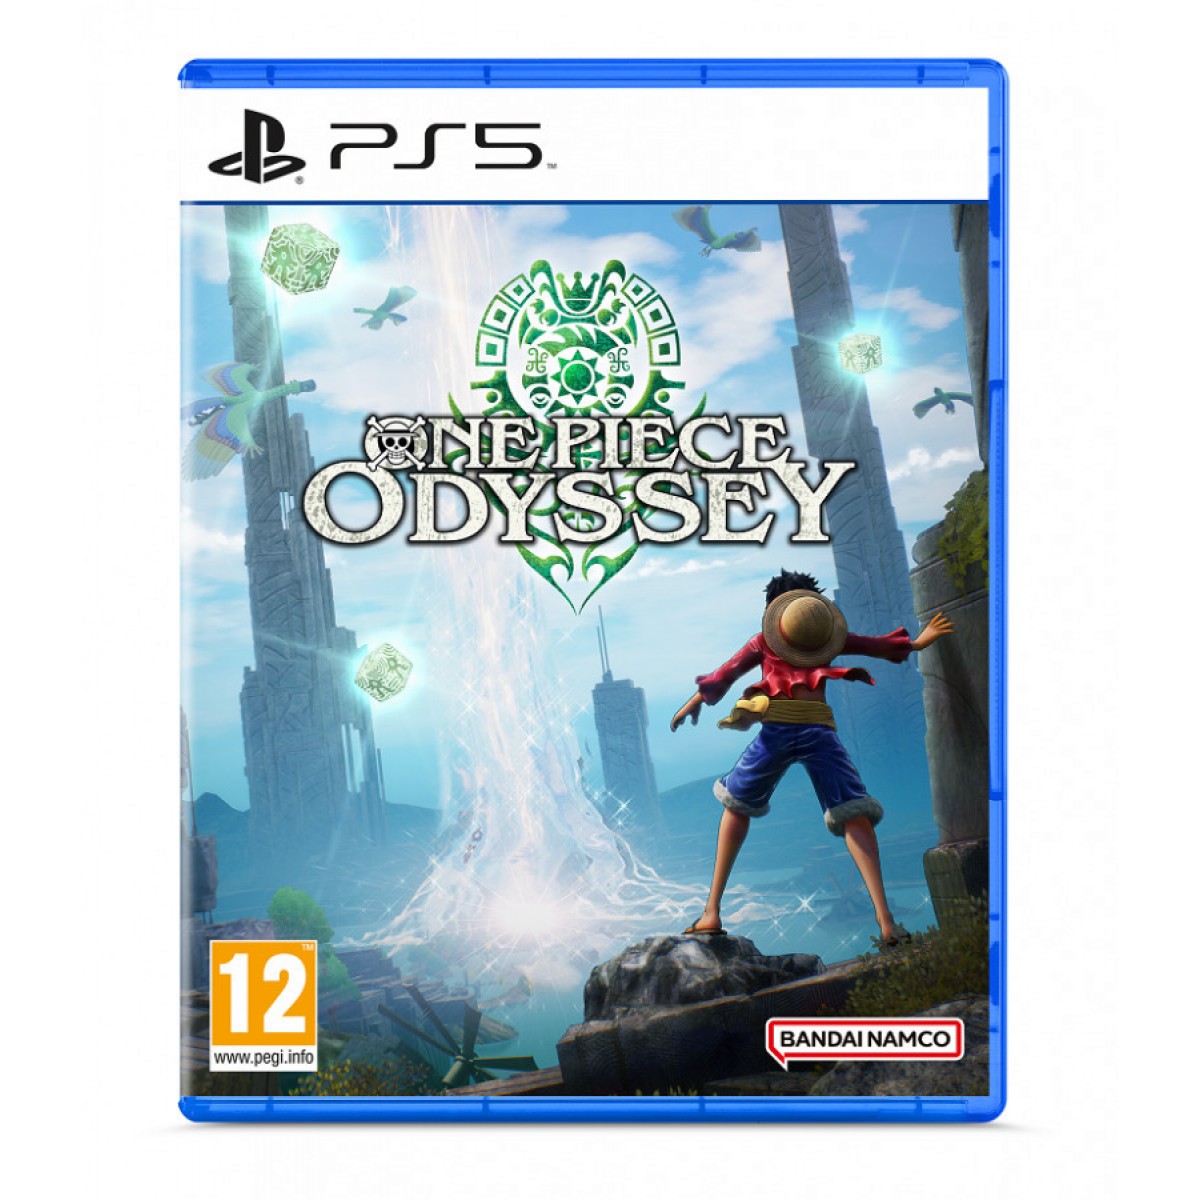 PS5 ONE PIECE ODYSSEY GAME